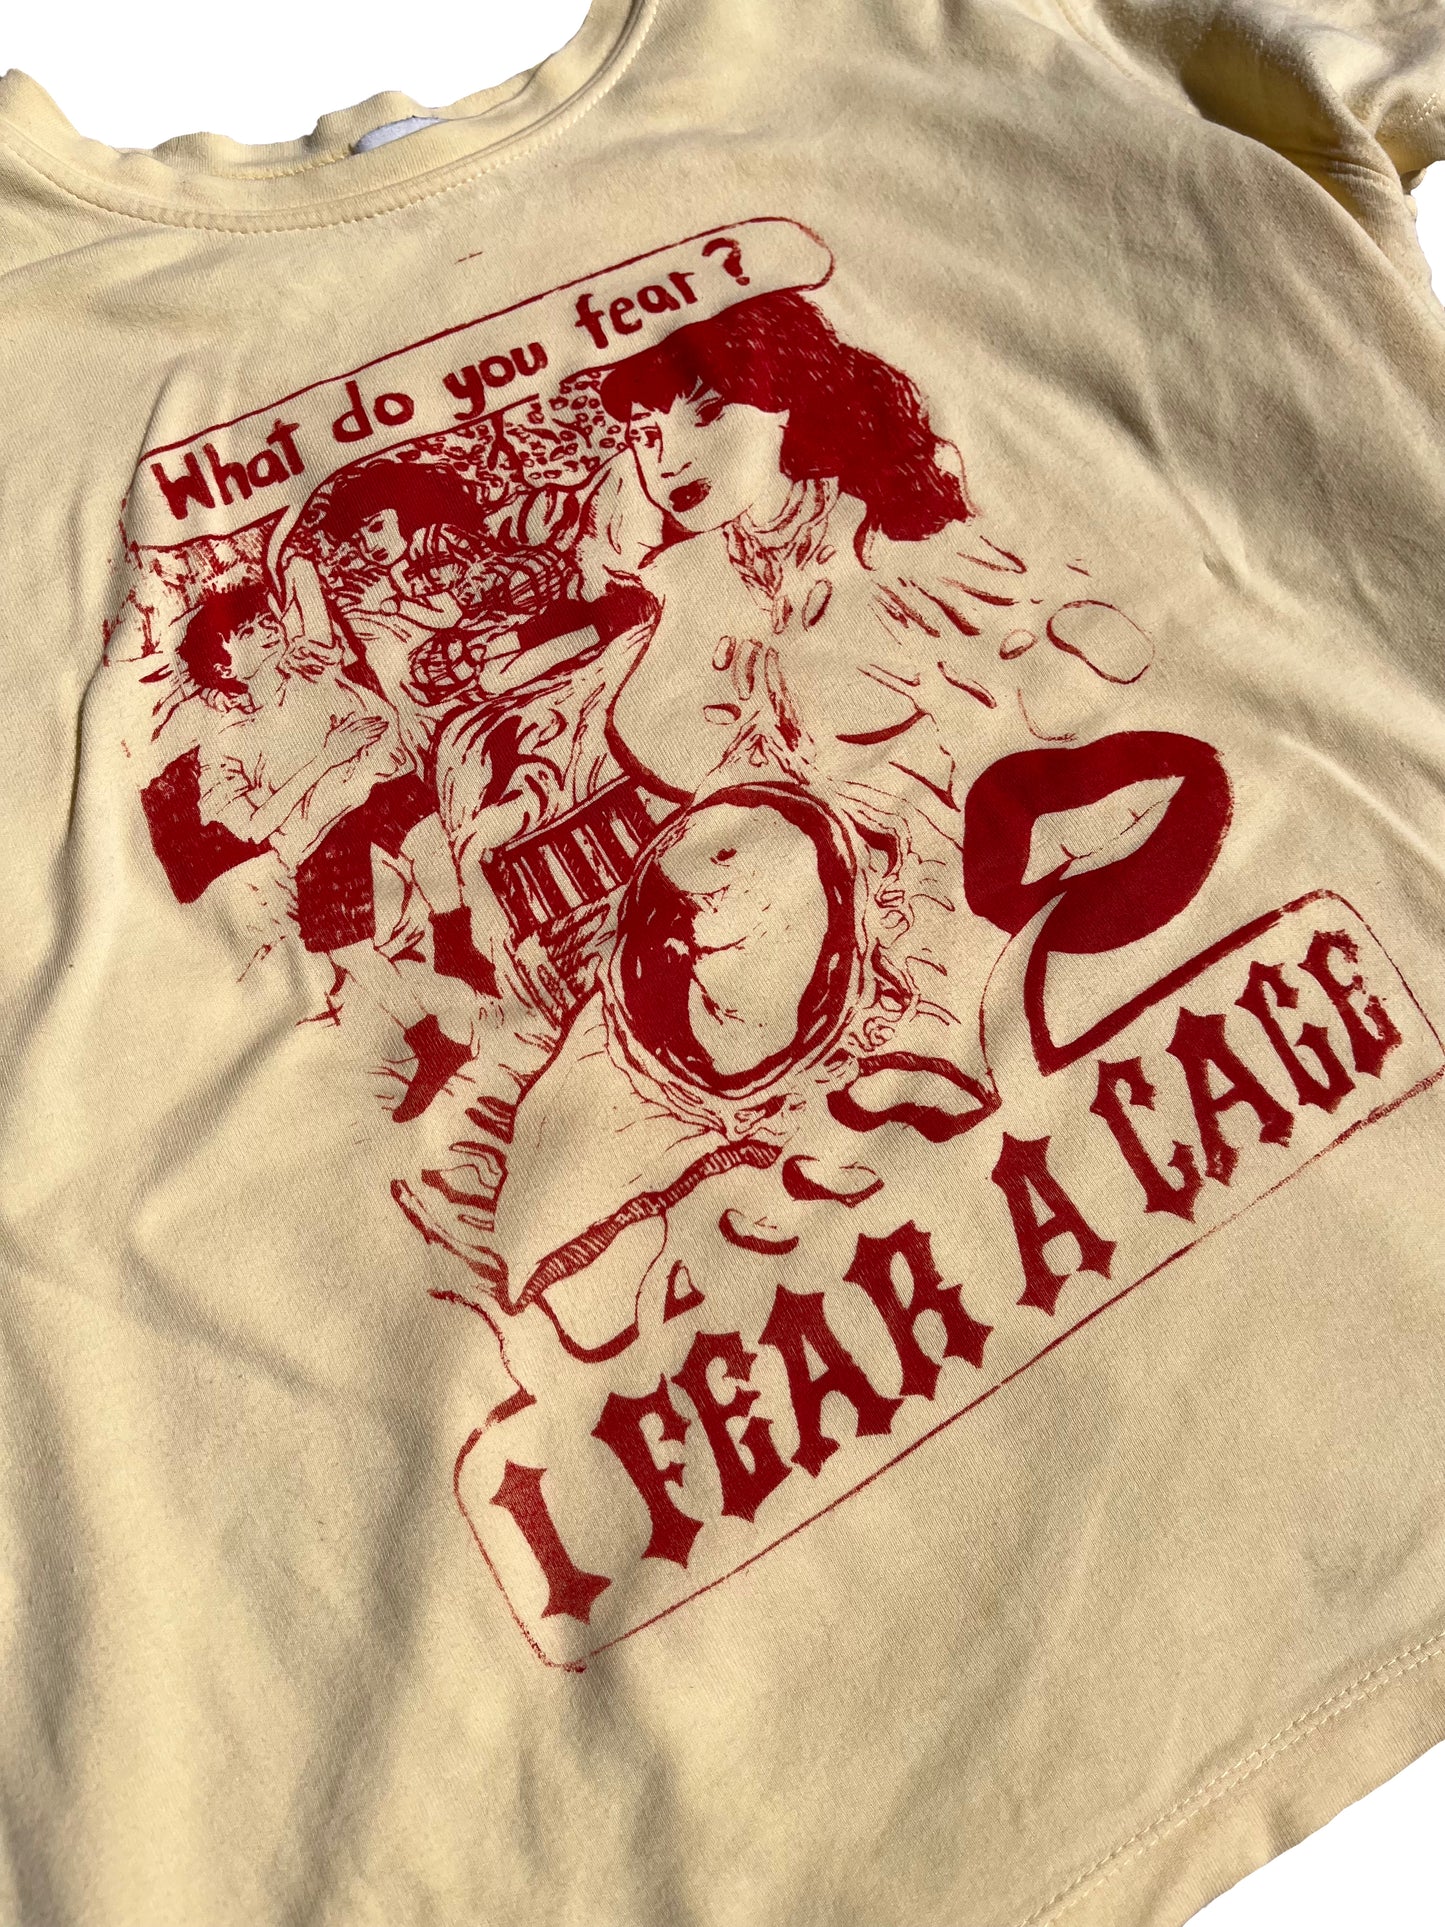 Small I Fear A Cage 05 Graphic Tee Shirt